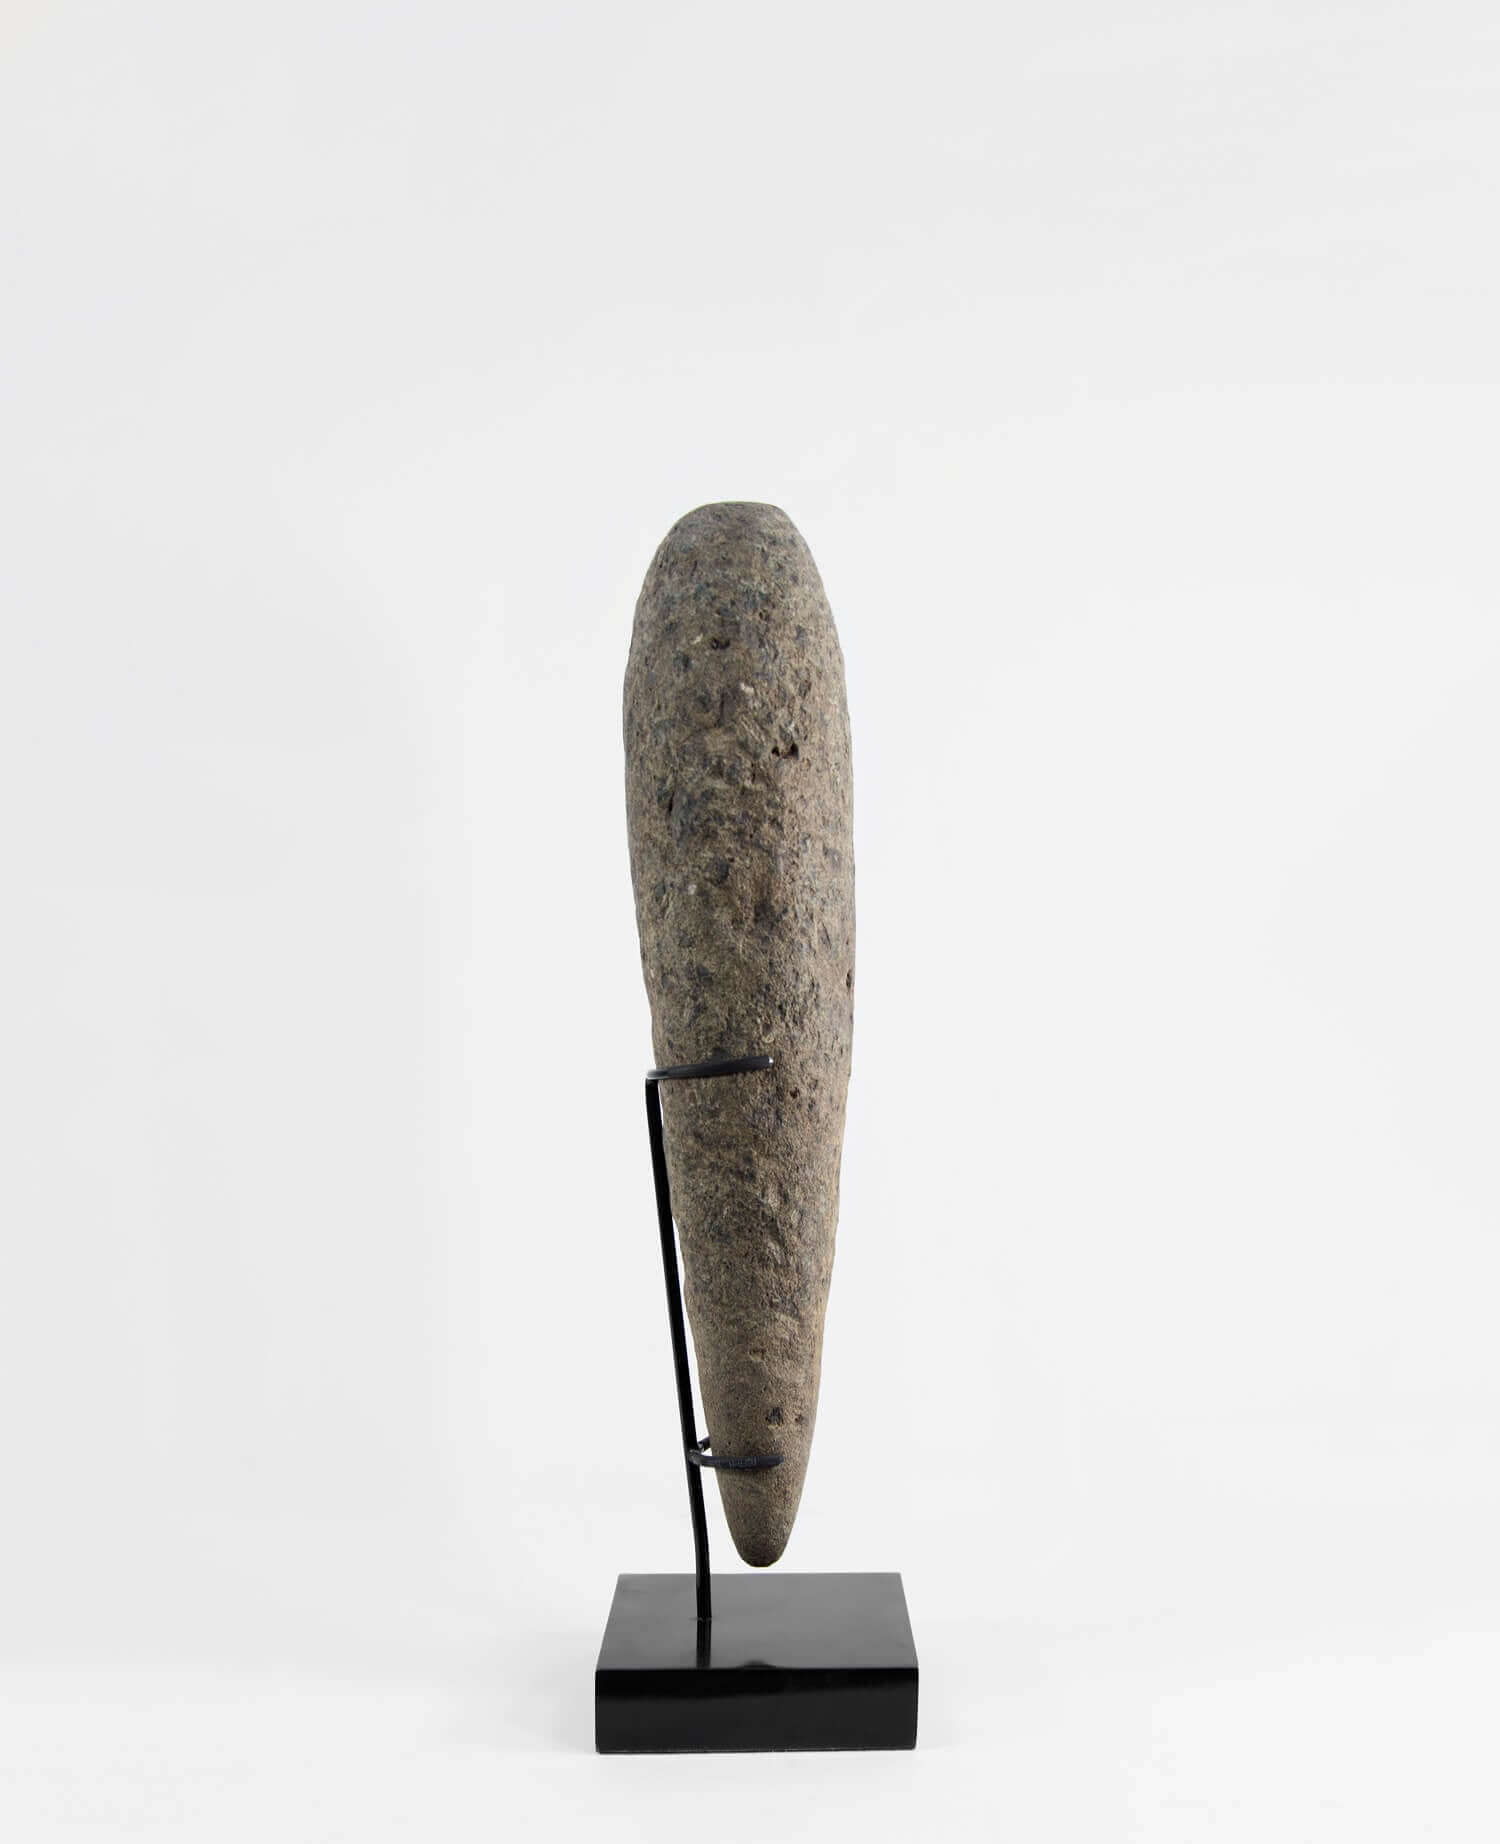 A stunning museum-standard rare authentic Neolithic pestle measuring 350mm created by an ancient hand